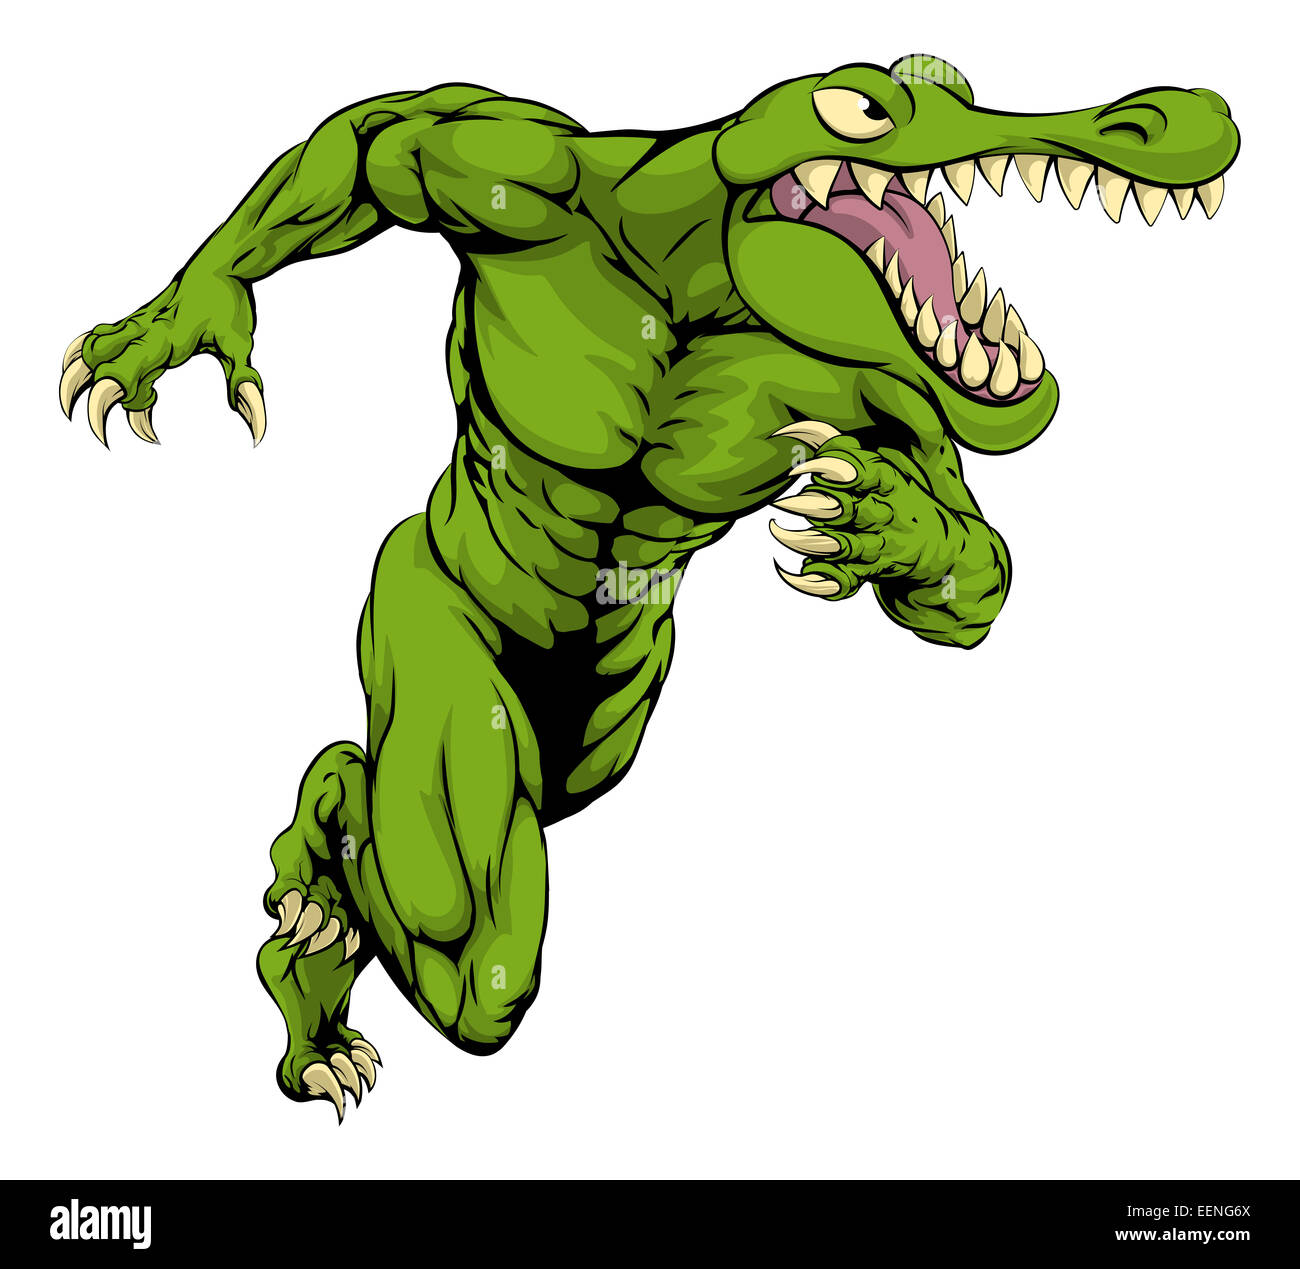 A cartoon scary alligator or crocodile mascot sprinting or charging Stock Photo